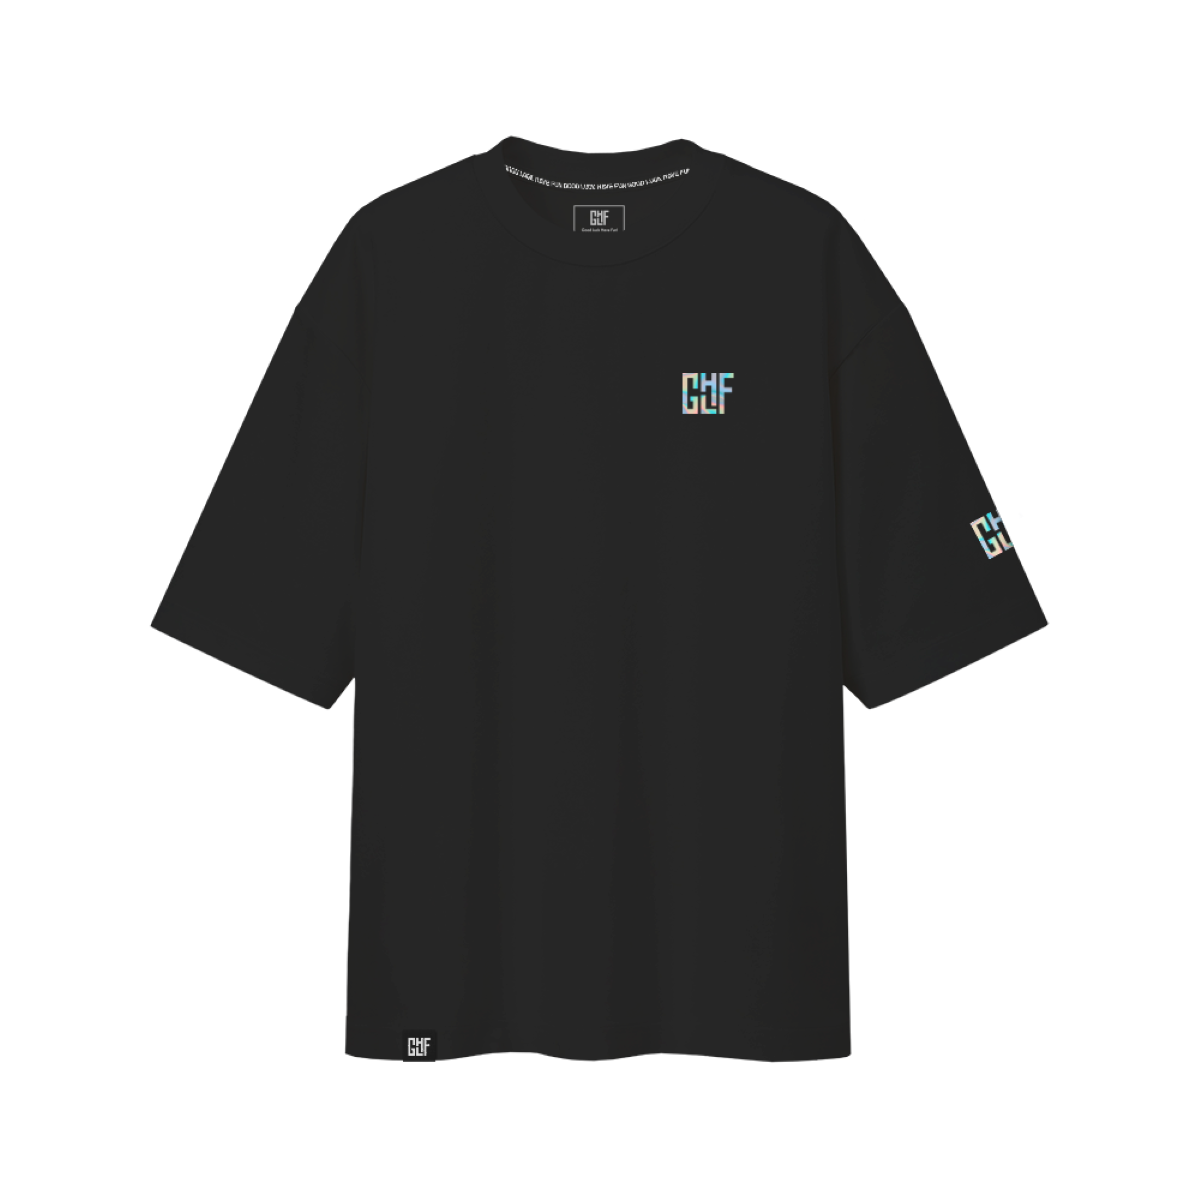 Oversize (S/M) Holografisches T-Shirt Logo